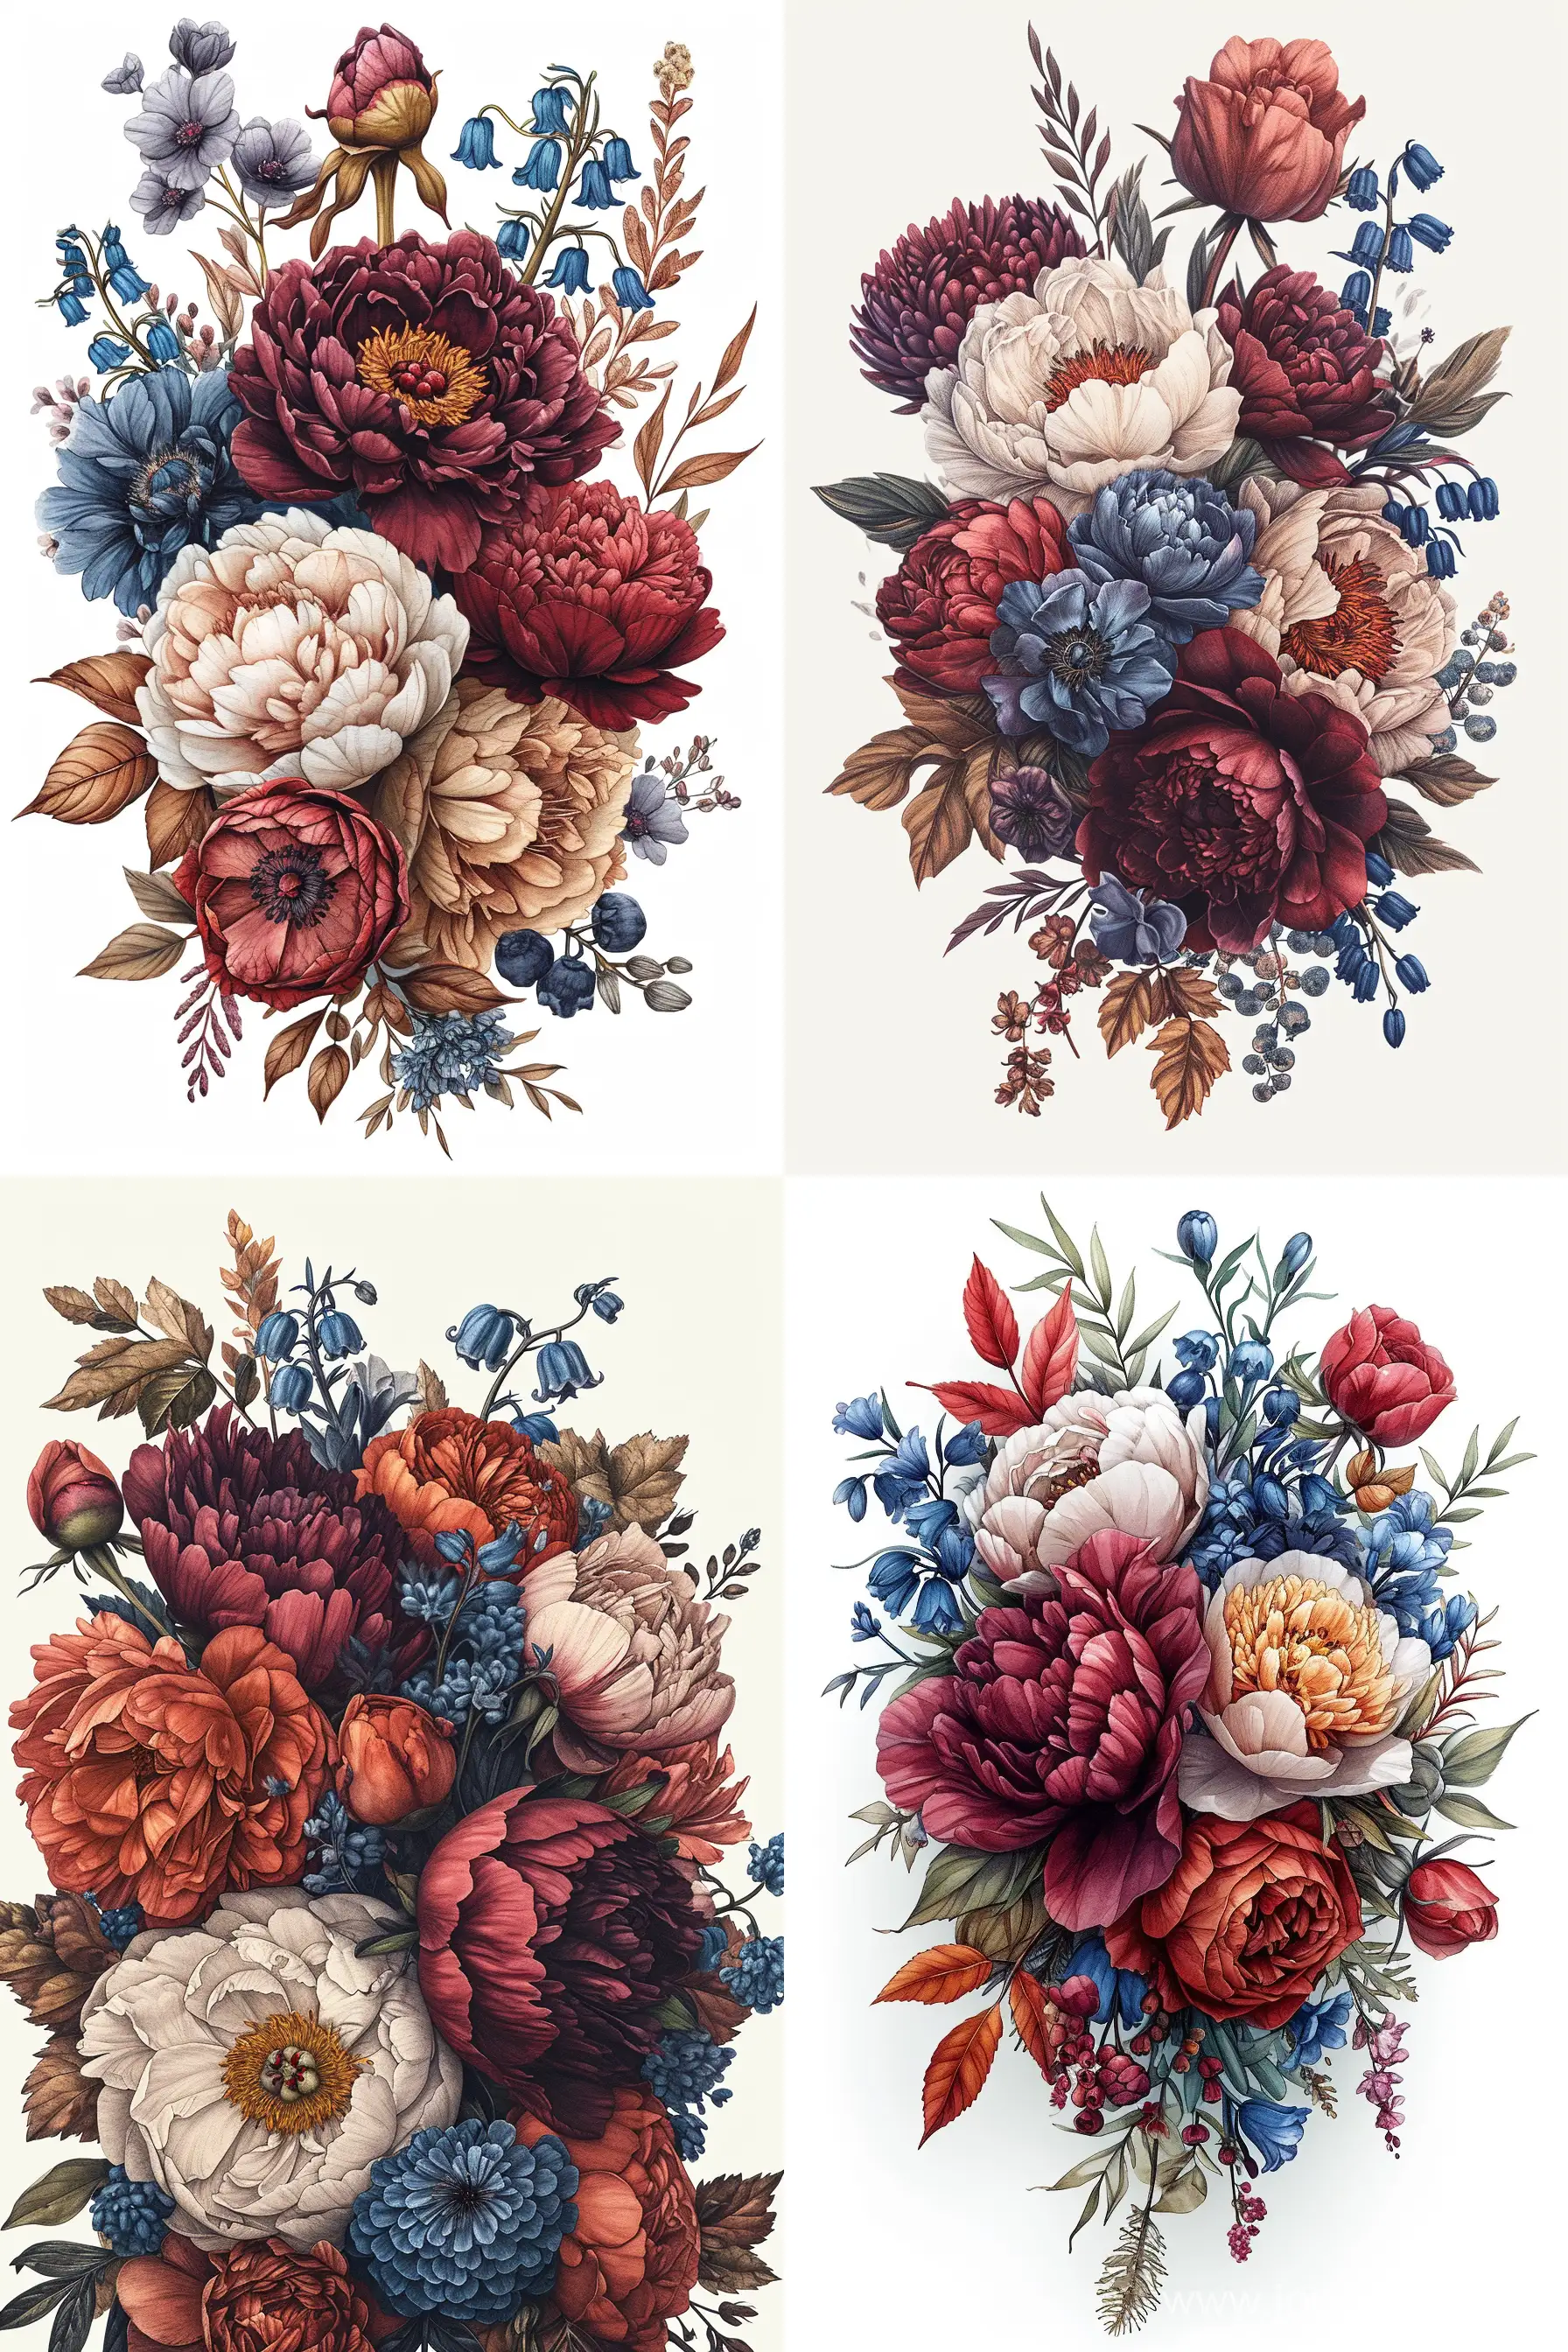 Exquisite-Botanical-Wreath-Illustration-with-Peonies-Roses-and-Bluebells